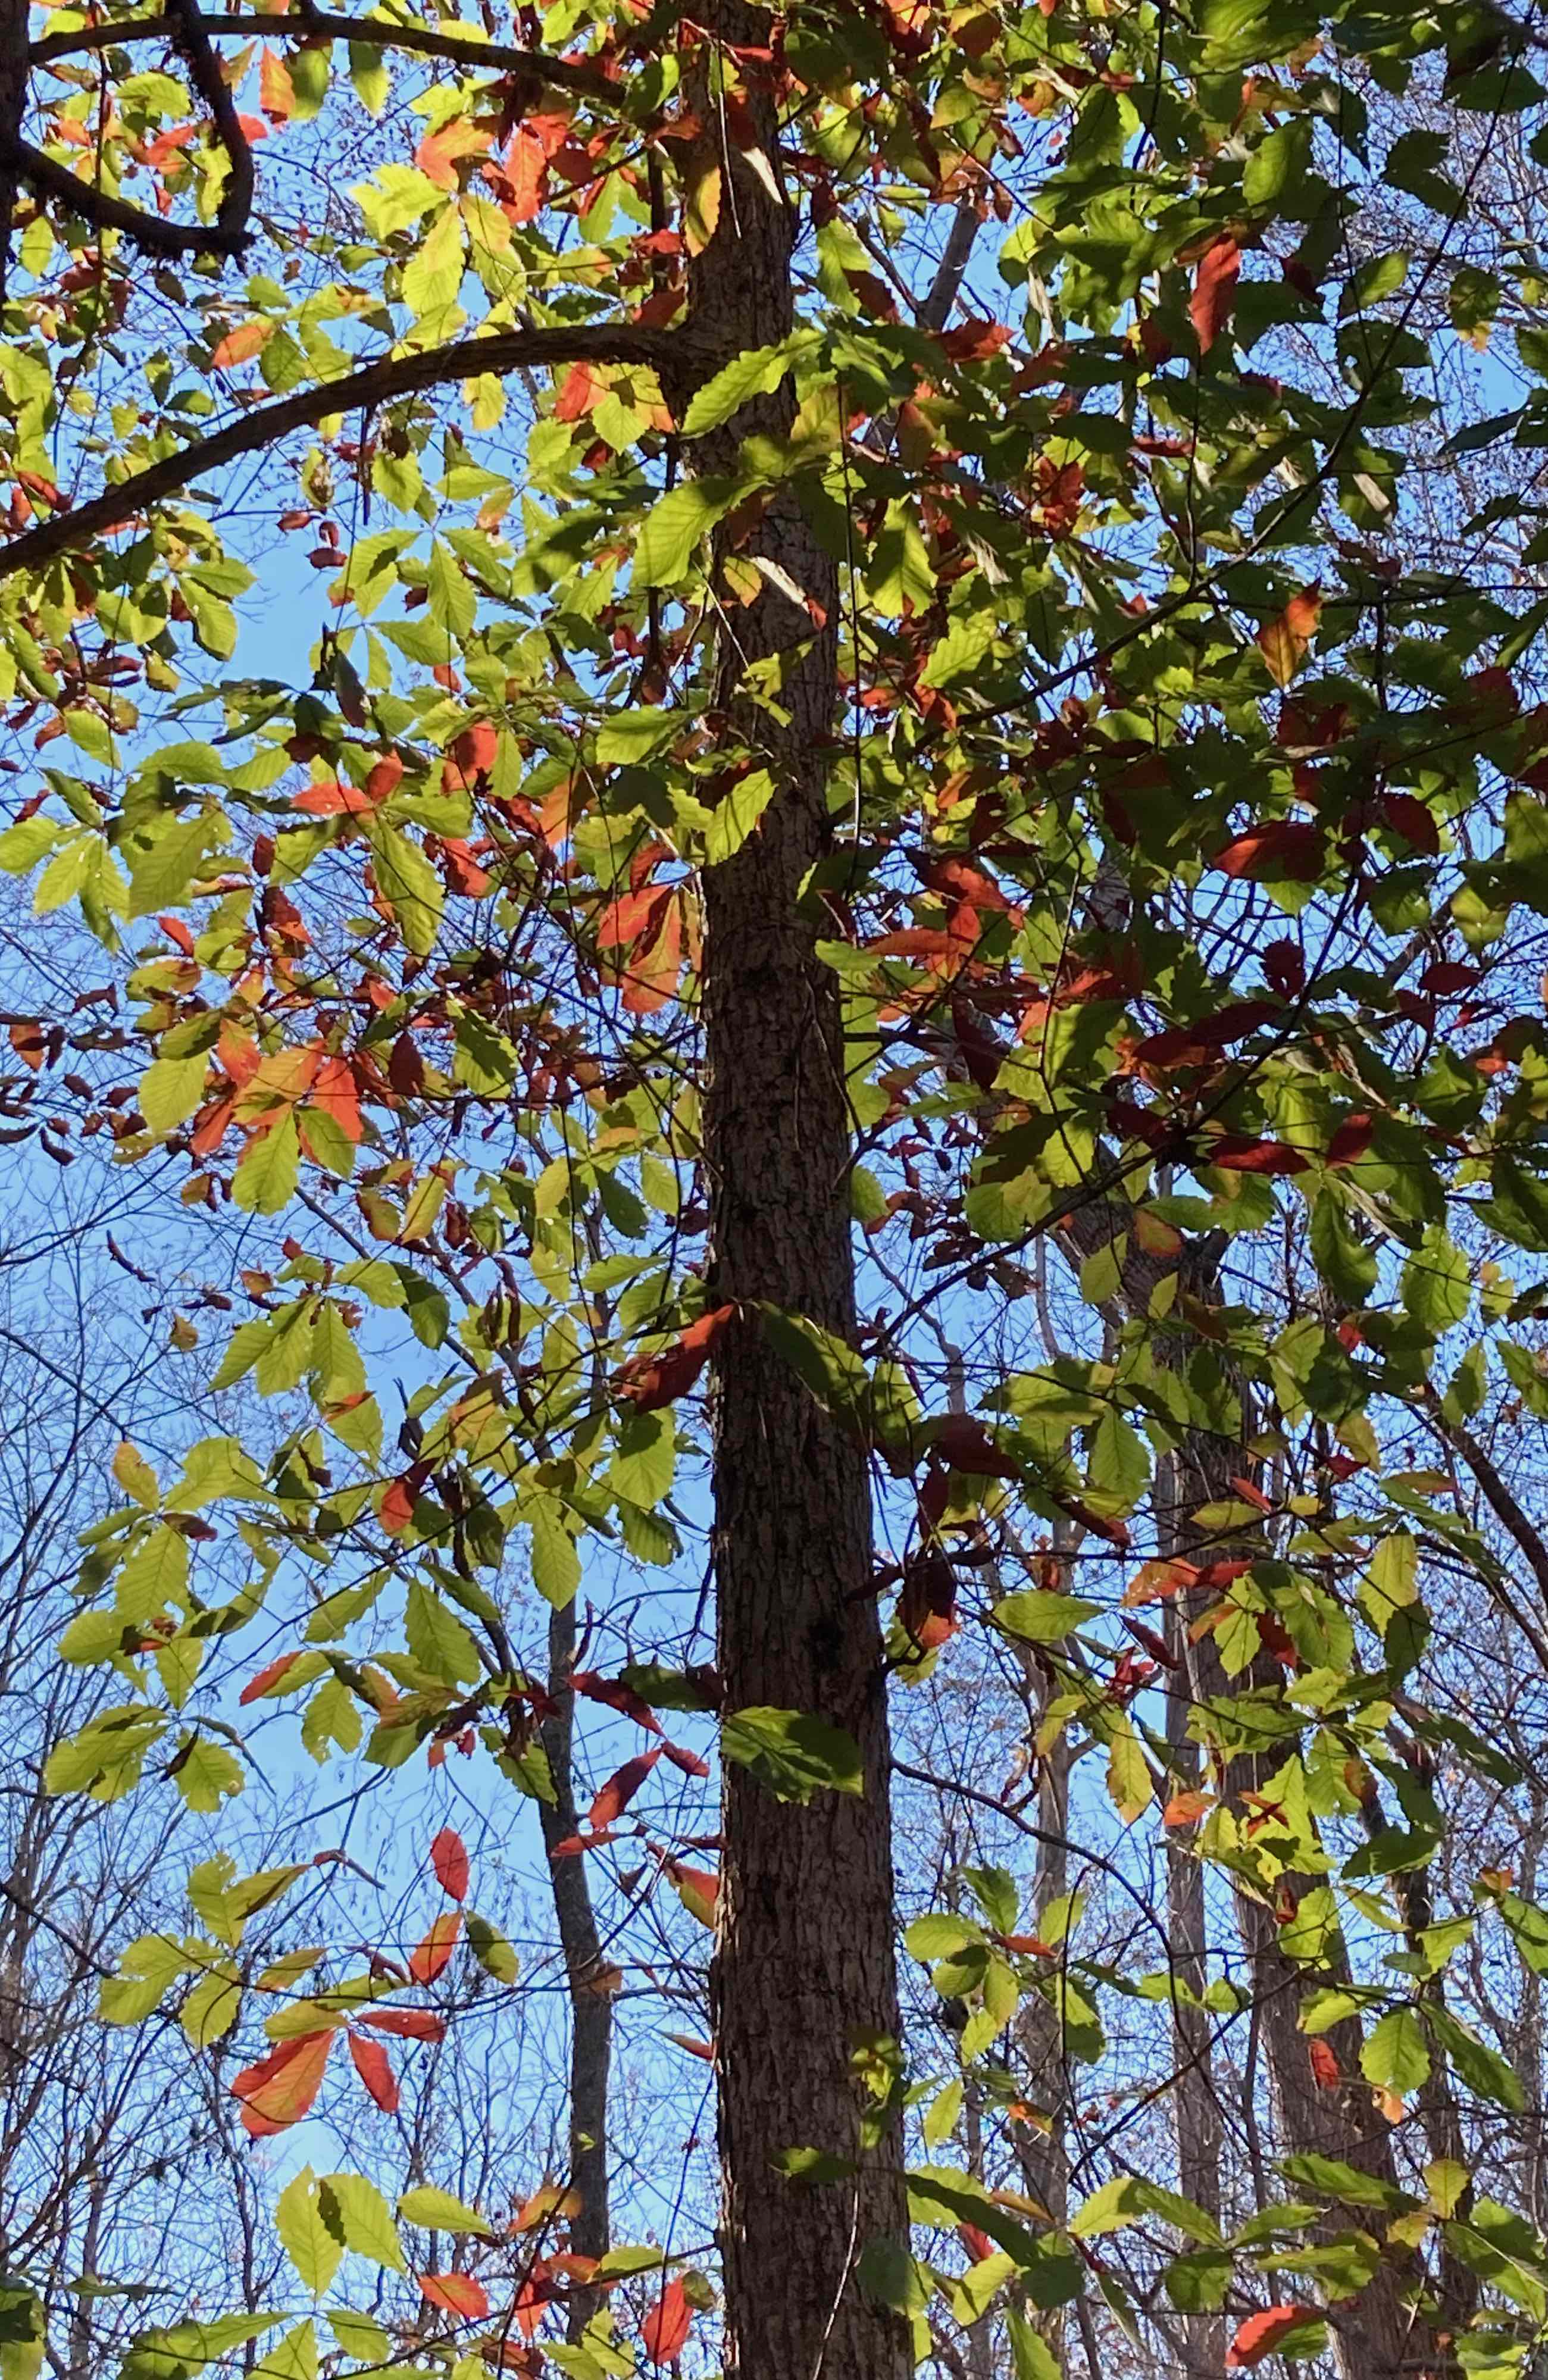 The Scientific Name is Quercus michauxii [= Quercus prinus]. You will likely hear them called Swamp Chestnut Oak, Basket Oak, Cow Oak. This picture shows the Early Fall color. of Quercus michauxii [= Quercus prinus]